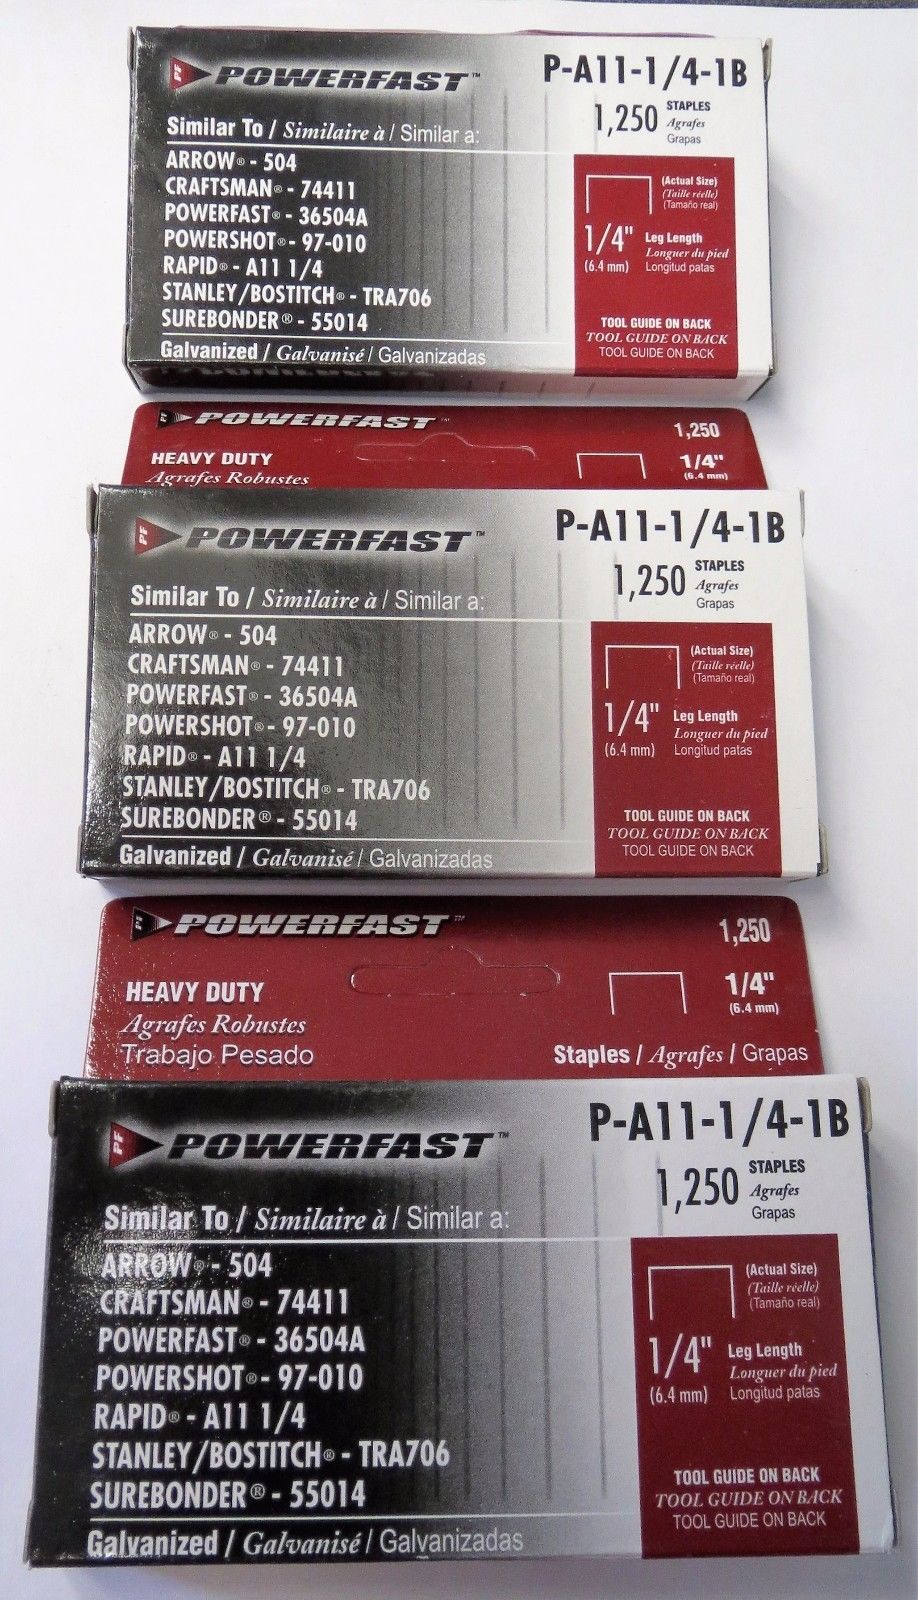 Powerfast P-A11-1/4-1B Heavy Duty Staples 1/4" T-50 Size (3 BOXES)